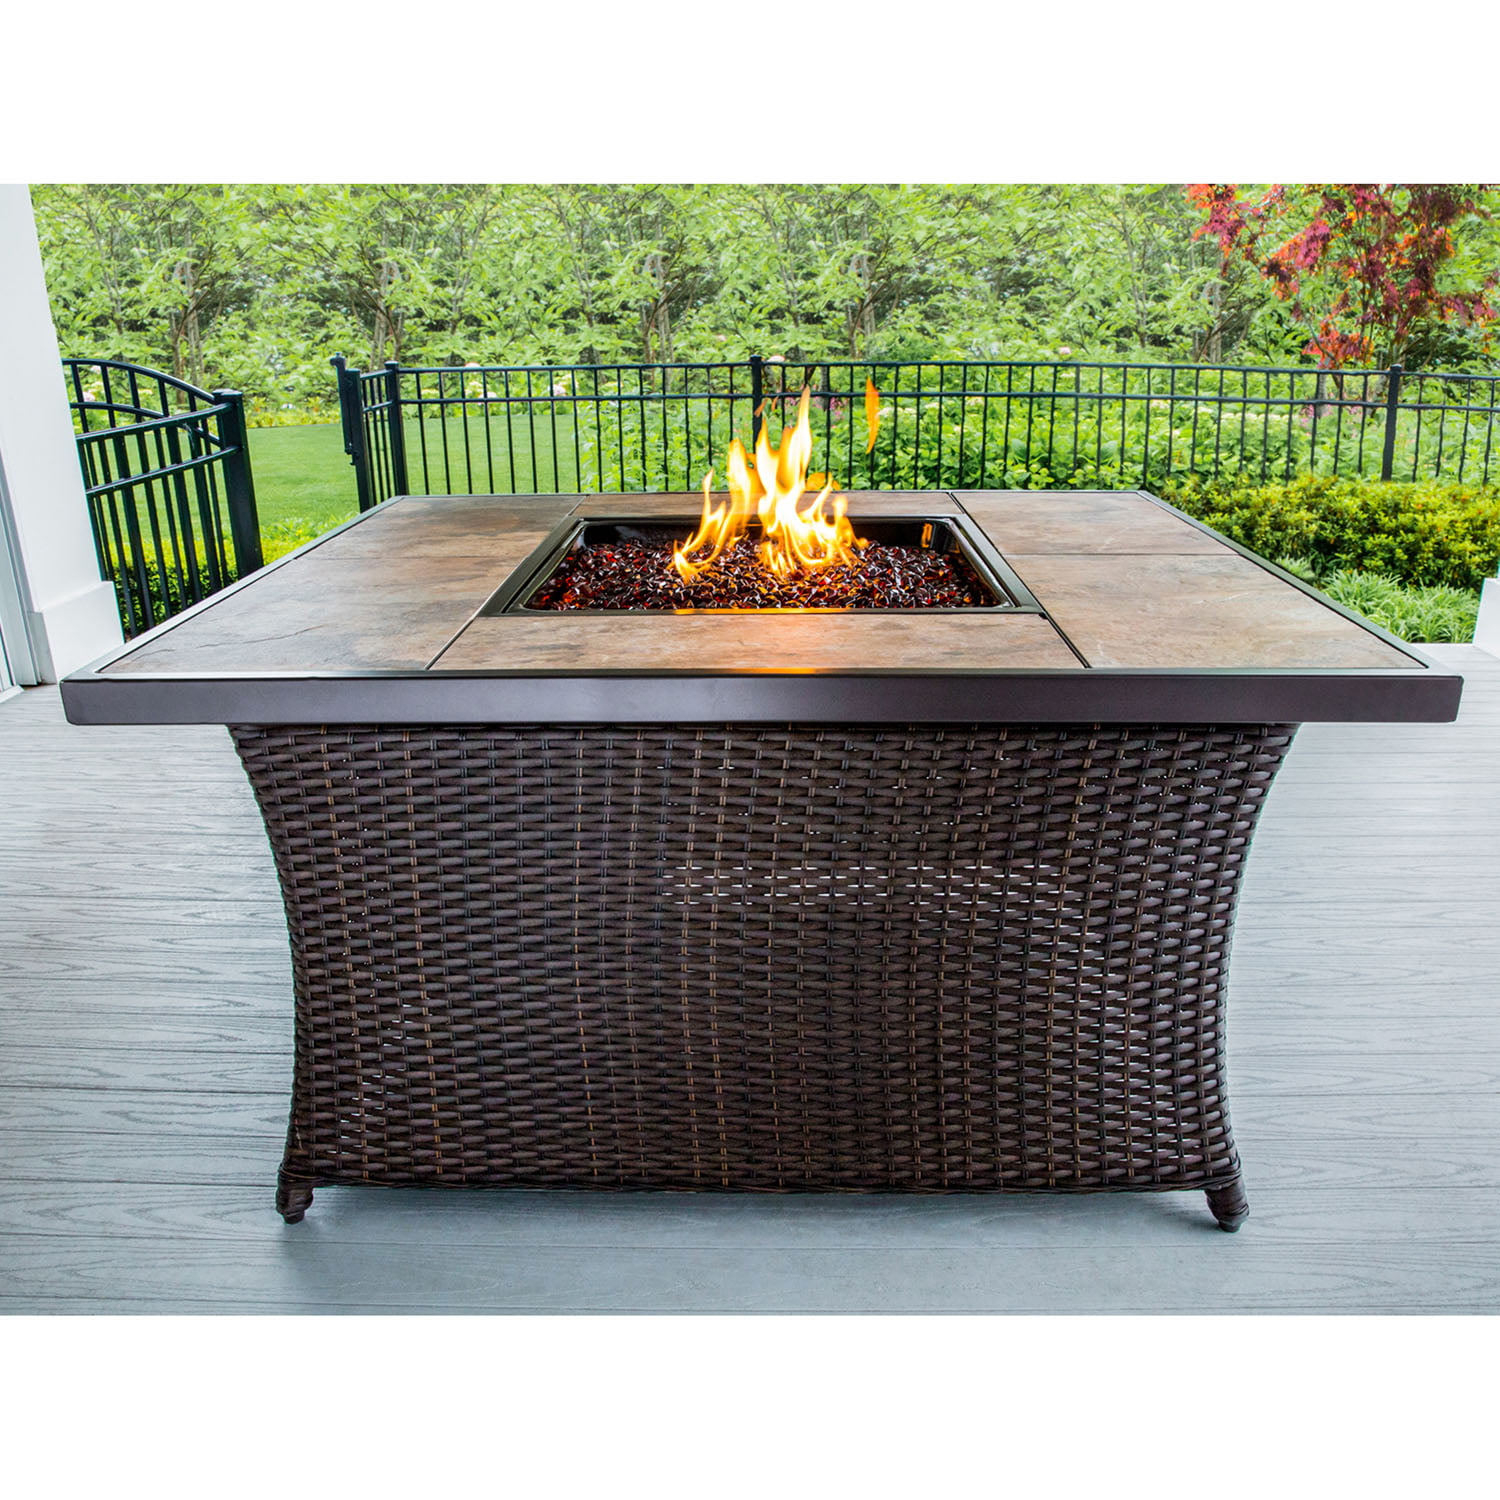 40 000 Btu Woven Fire Pit Coffee Table, Hanover Fire Pit Kit